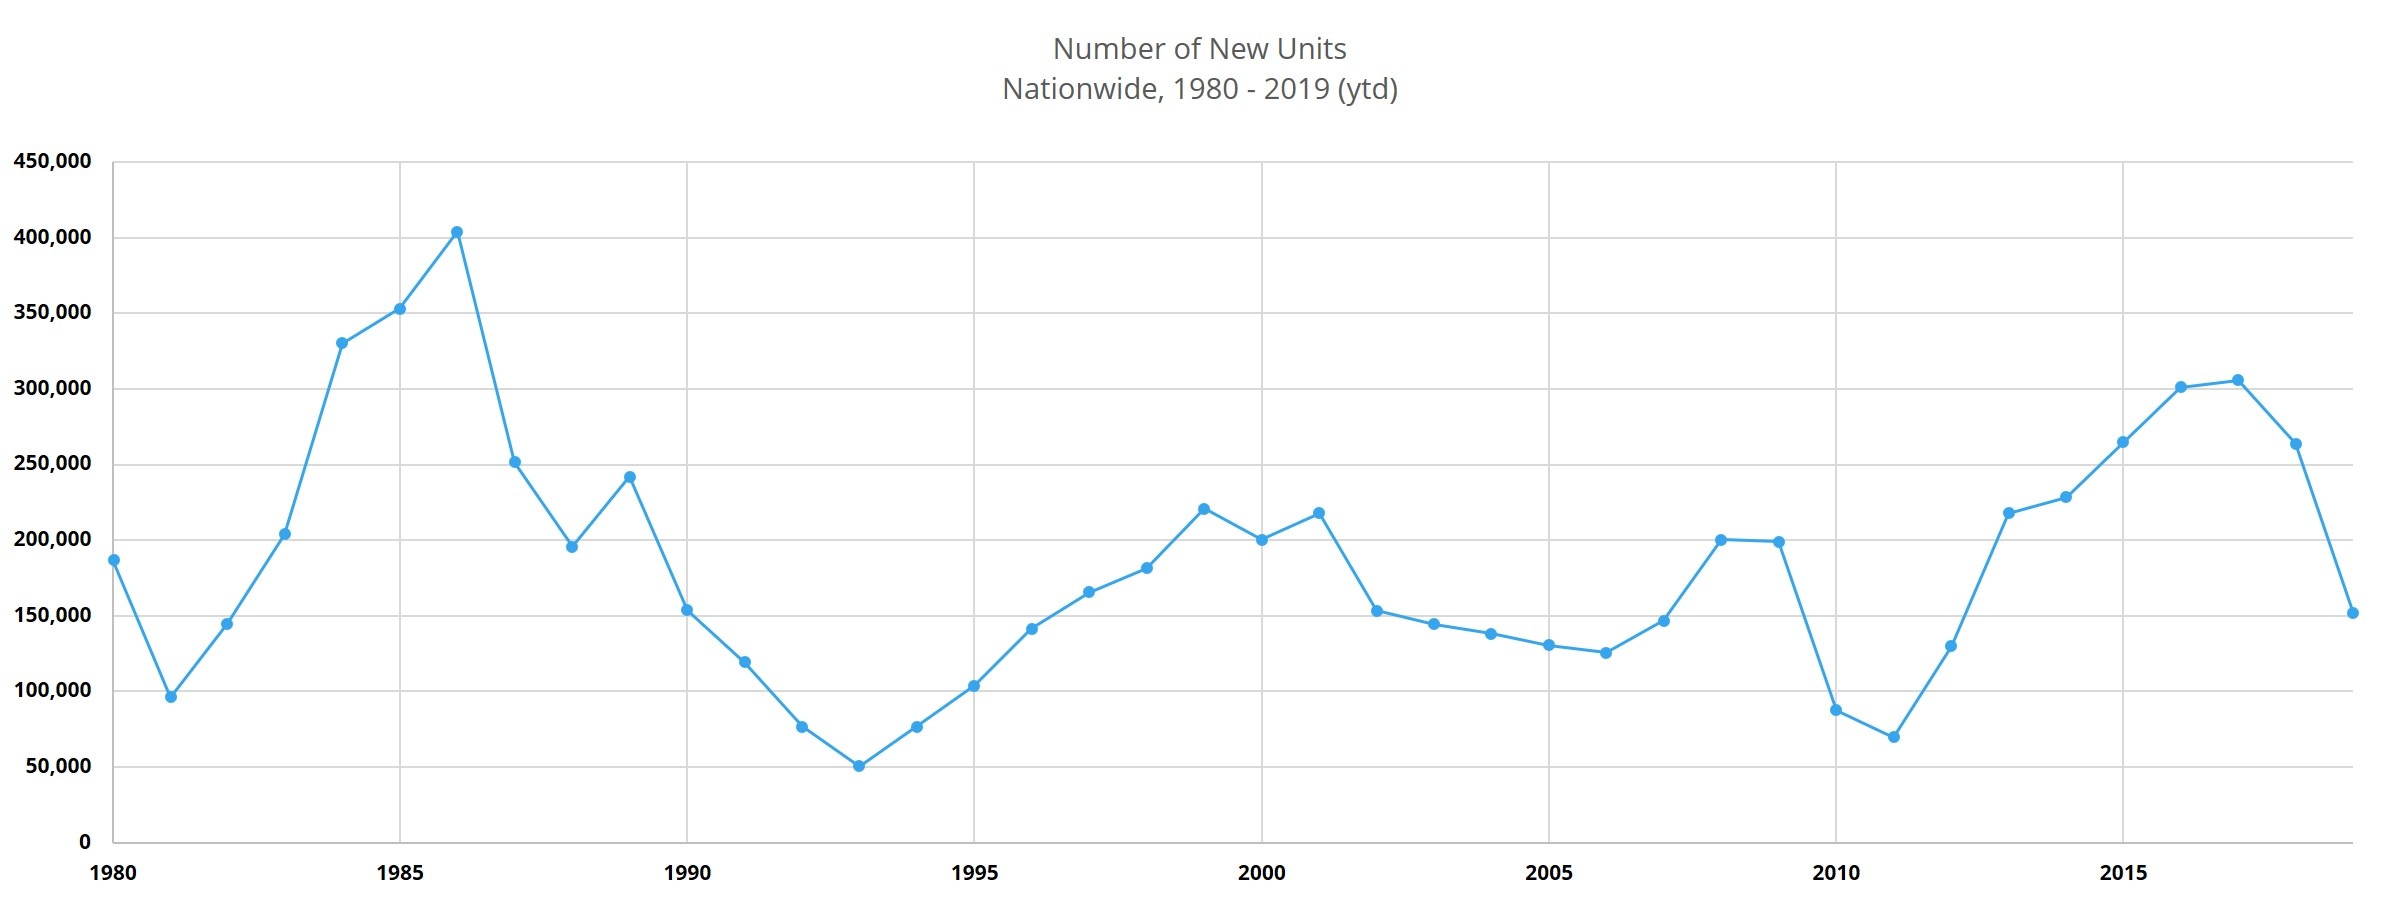 Number of New Units Nationwide